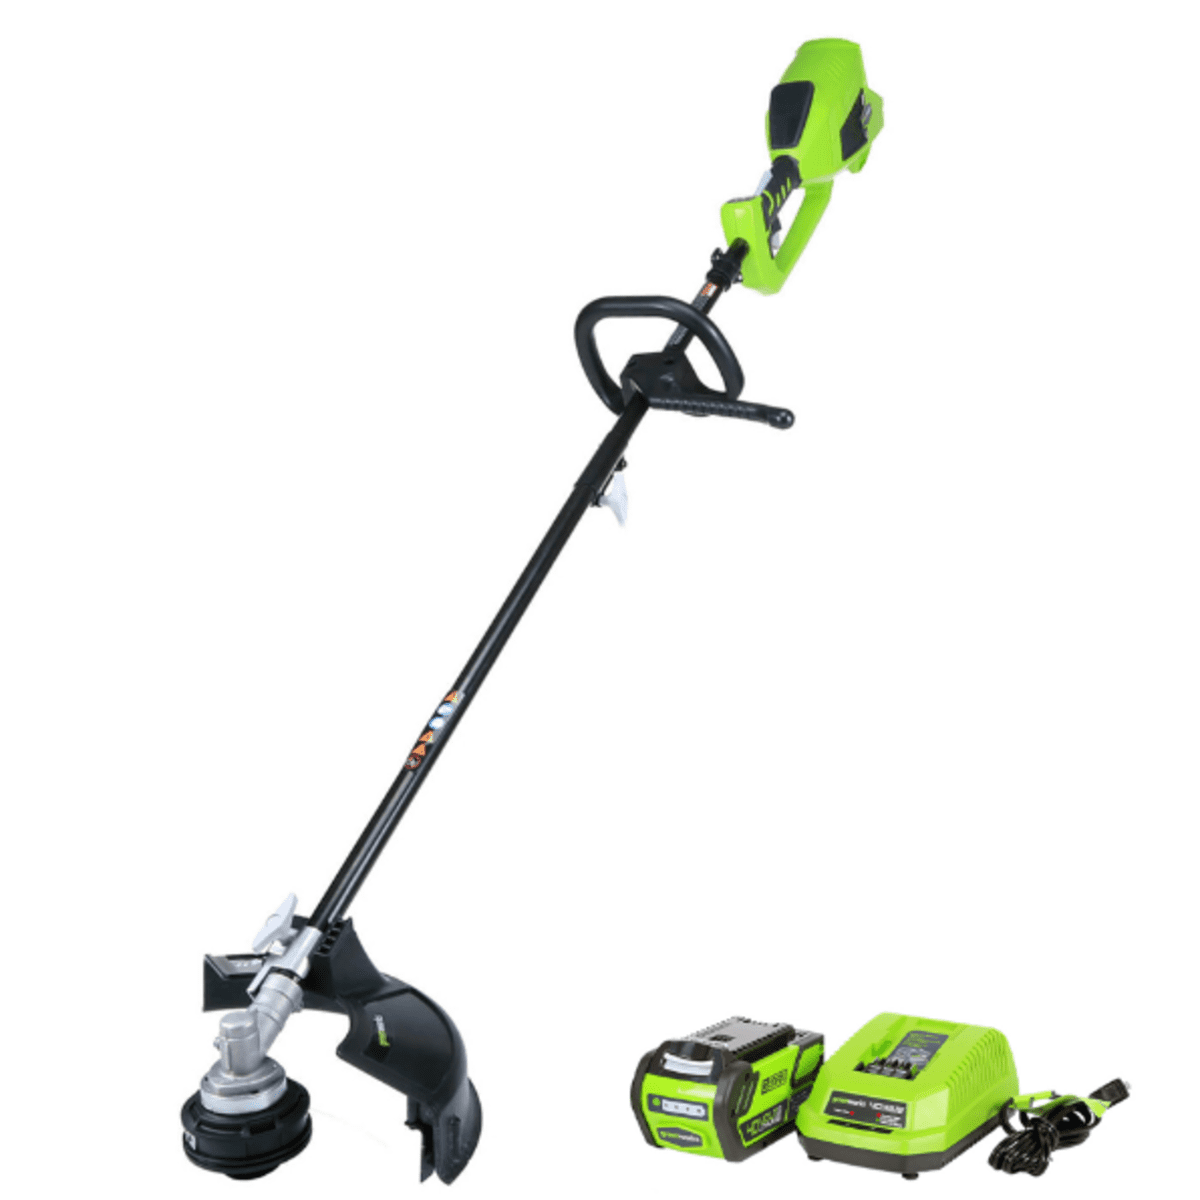 How To Change The String On A Greenworks Weed Eater Greenworks 40V Cordless String Trimmer: Pros and Cons From an Owner -  Dengarden